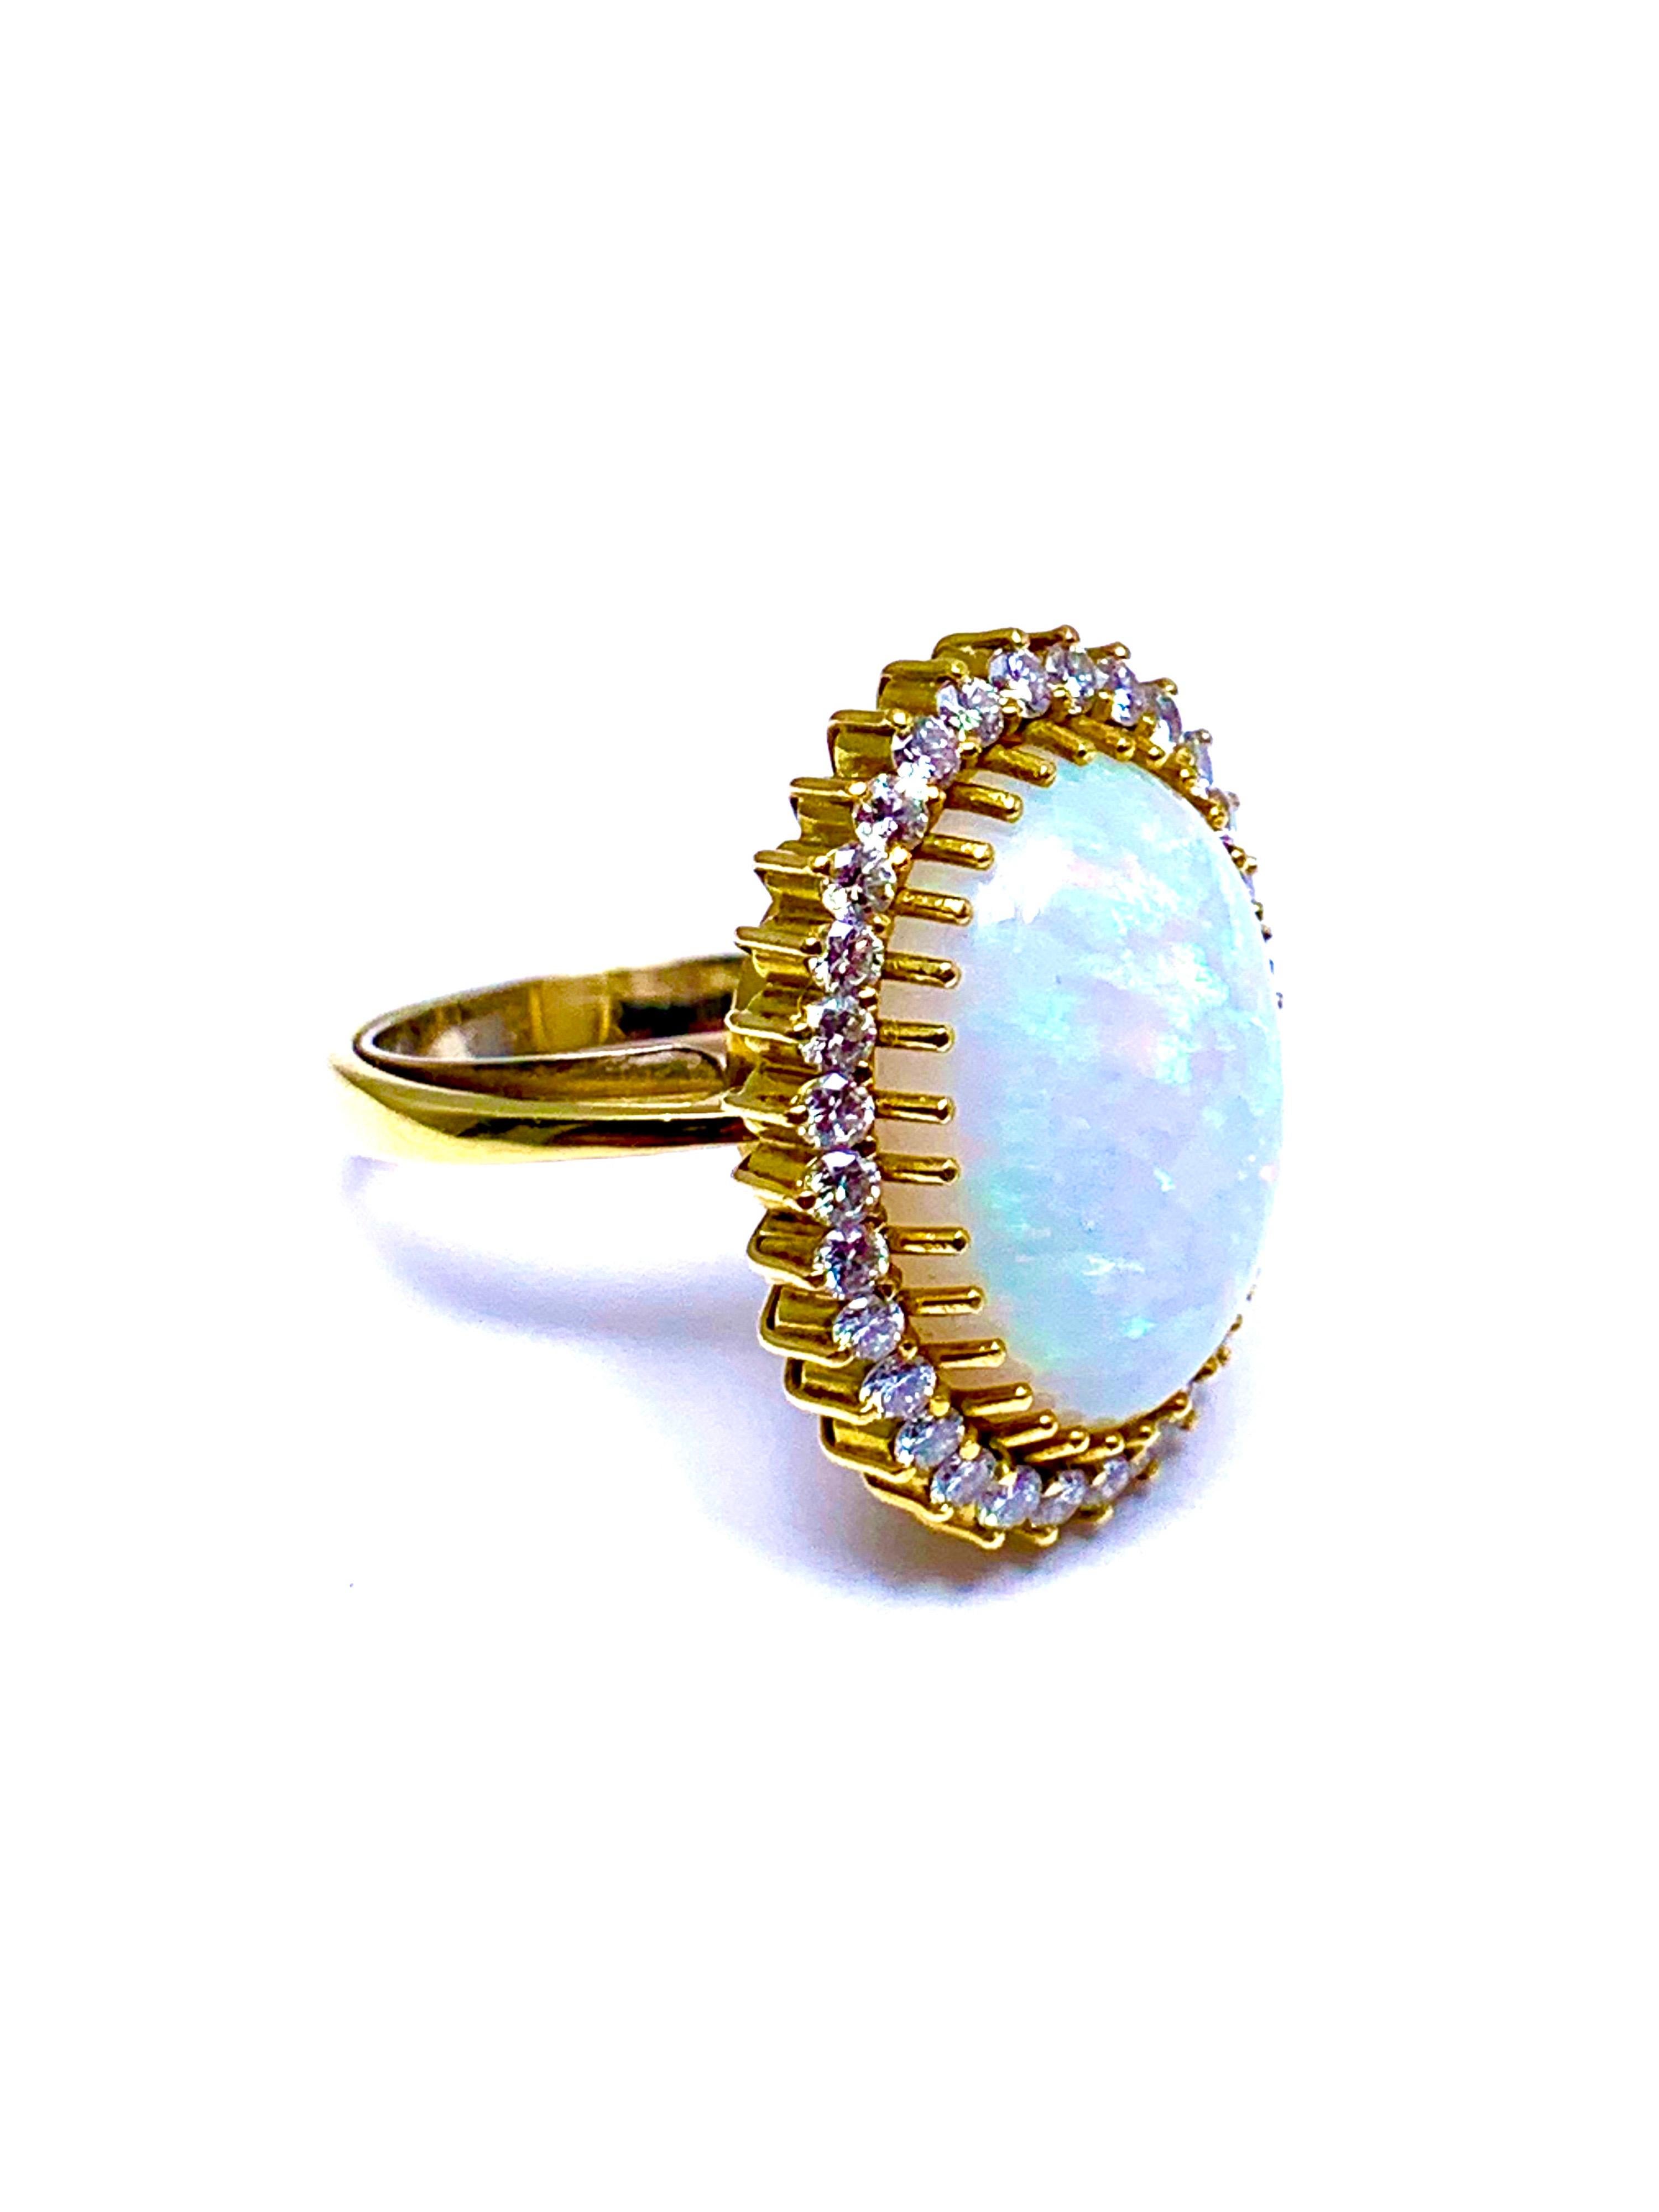 Women's or Men's 6.16 Carat Oval Cabochon Opal and Diamond 18 Karat Cocktail Ring